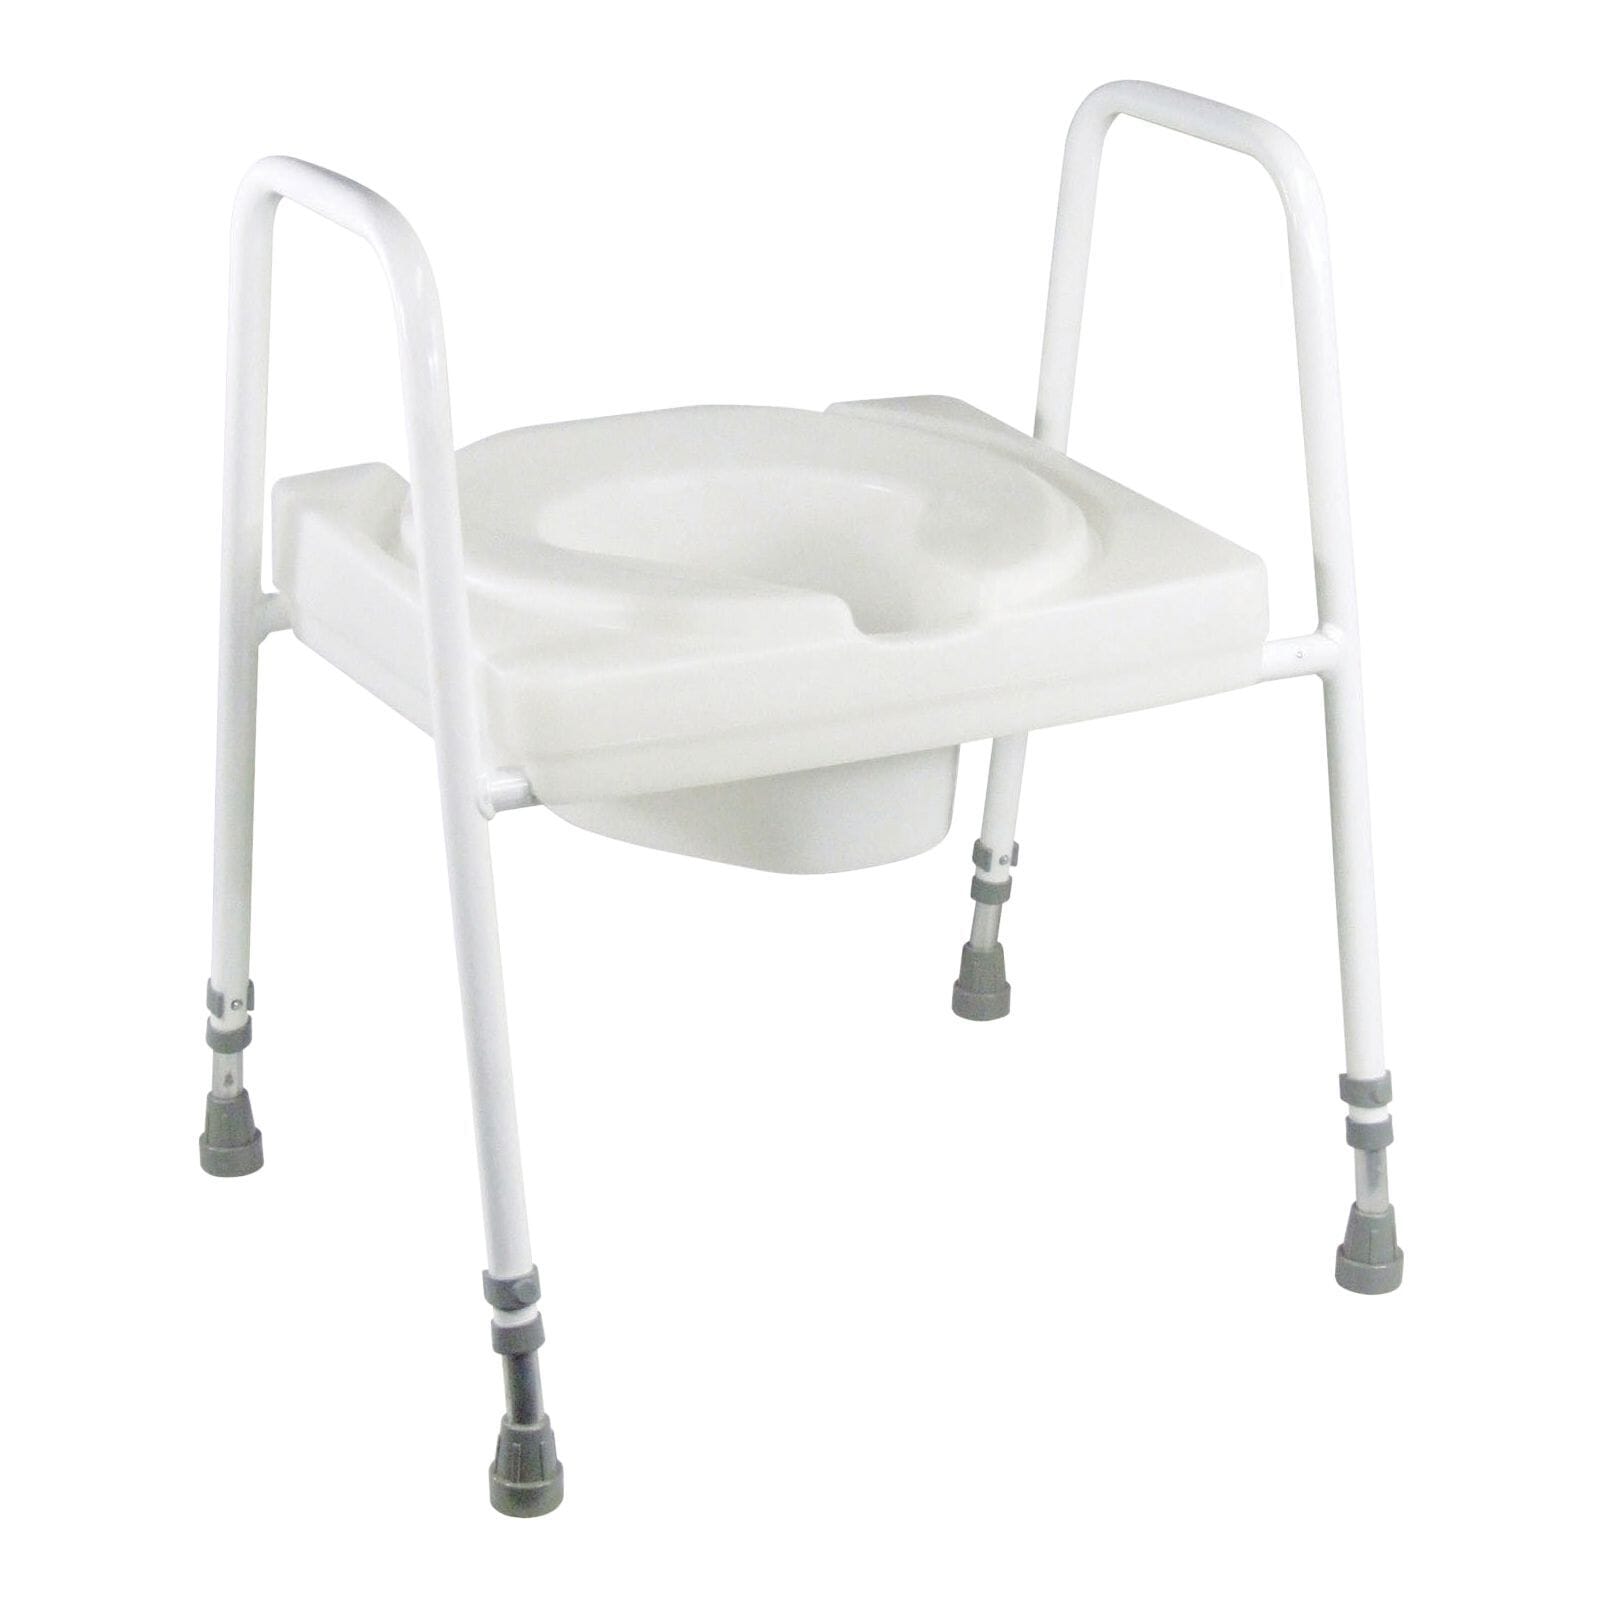 View Ashby Lux Toilet Seat and Frame information